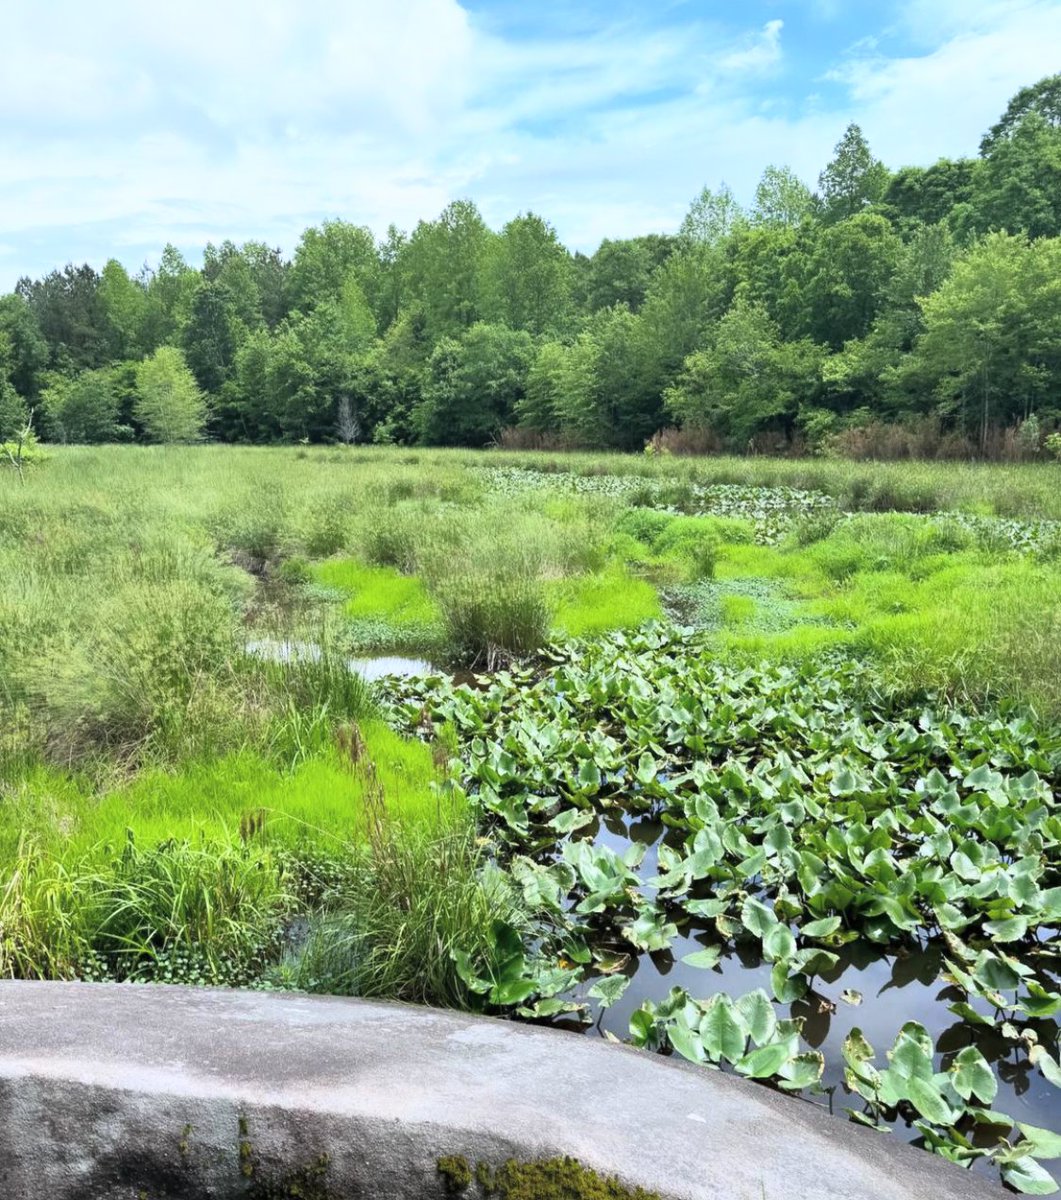 This gorgeous view of #Turnipseed Nature Preserve is today's #SundayShare and comes courtesy of Instagram's walkclubnc! Thanks for walking with us.